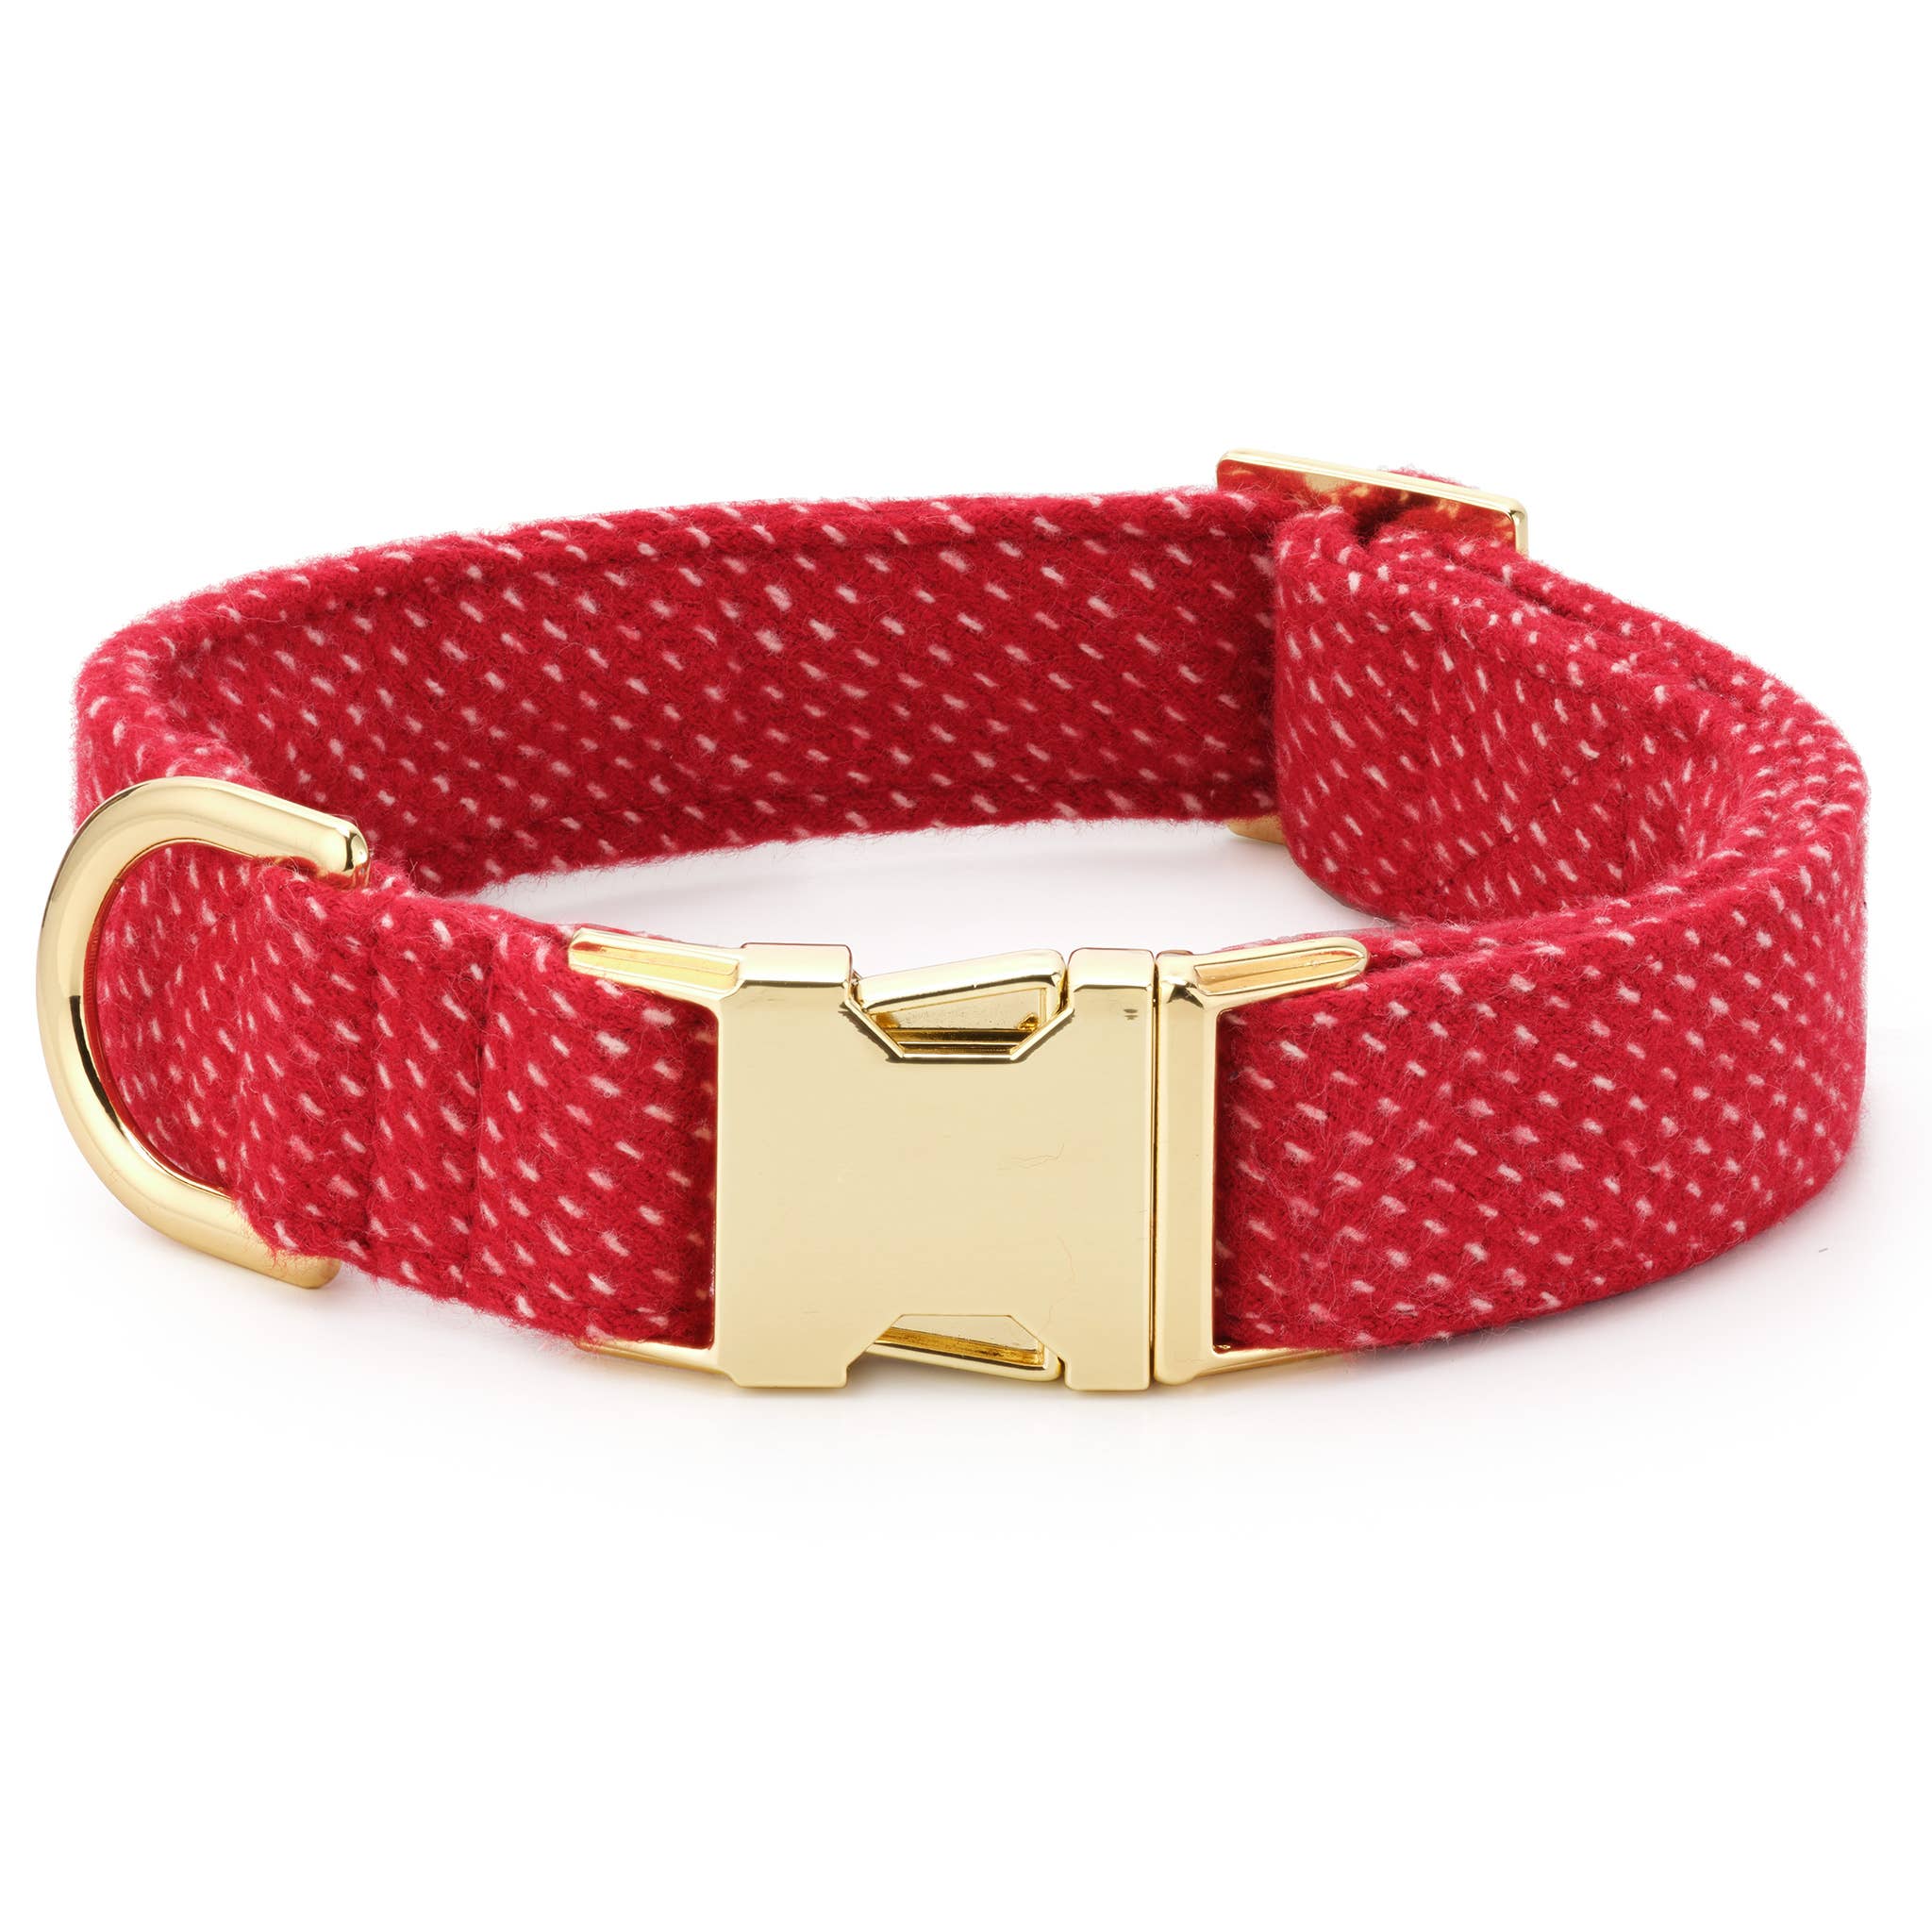 The Foggy Dog - Berry Stitch Flannel Holiday Dog Collar: S / Gold